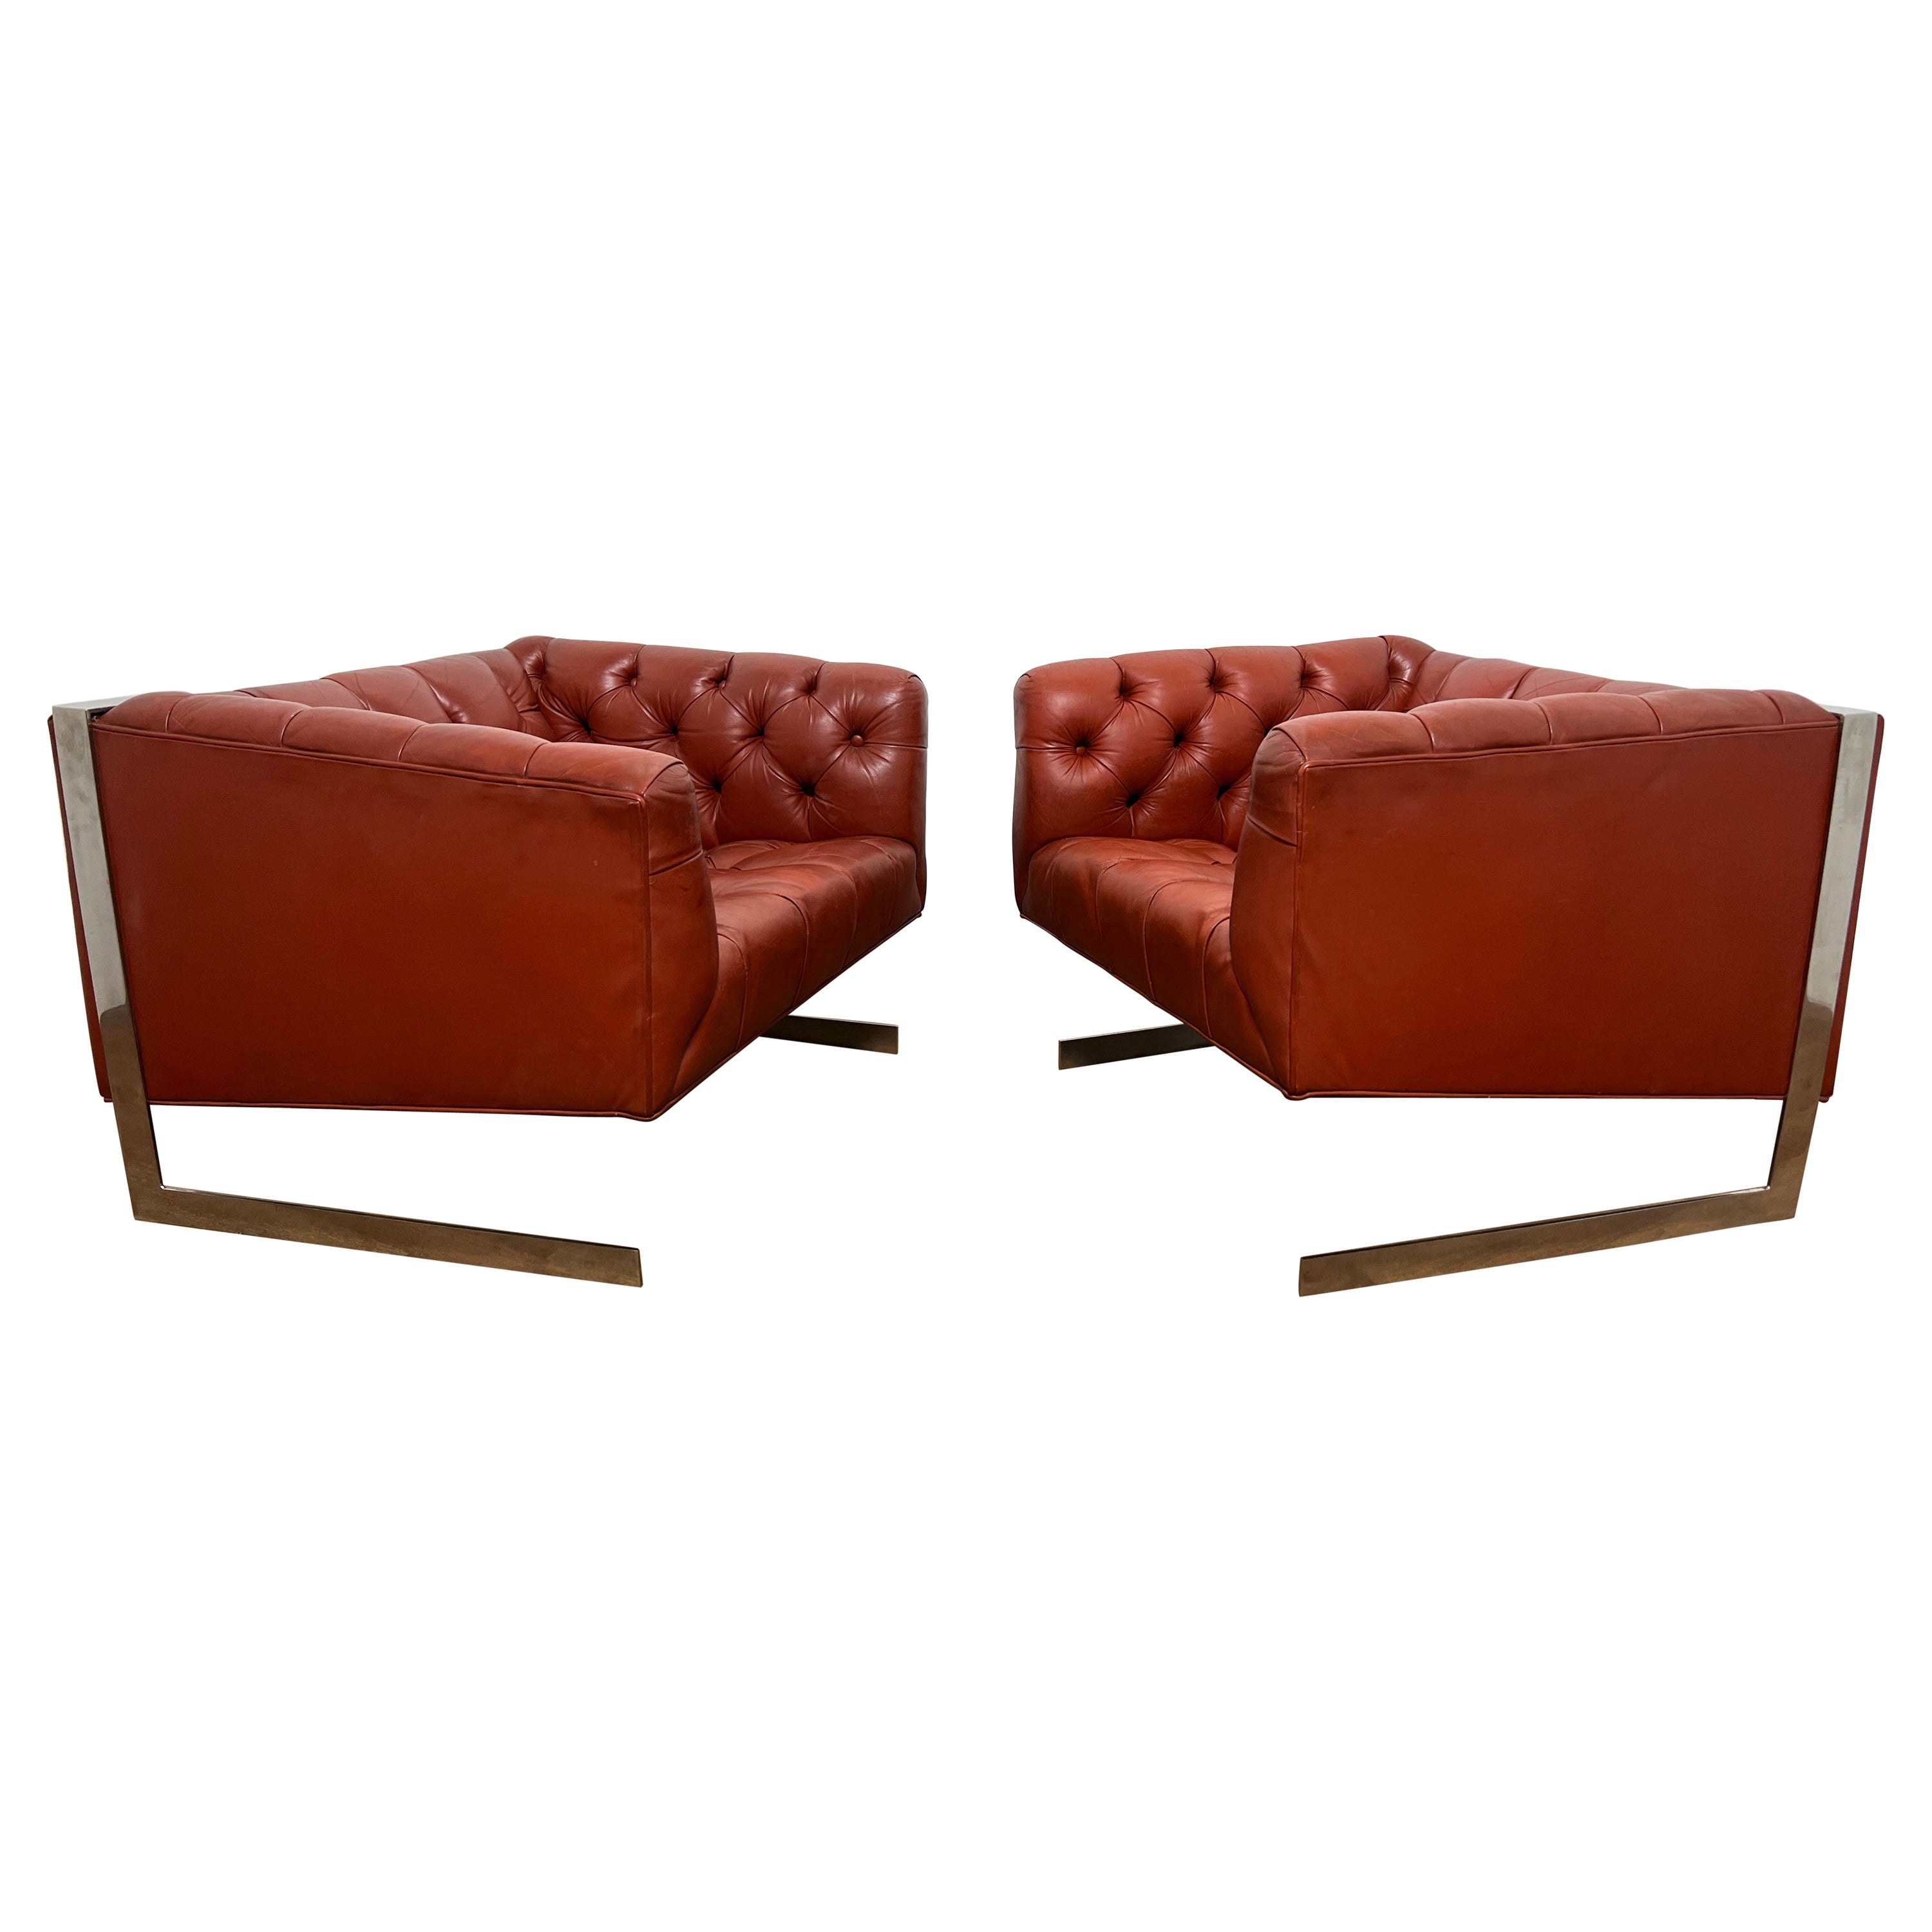 Pair of Milo Baughman Style Leather and Chrome Cantilever Lounge Chairs c. 1970s